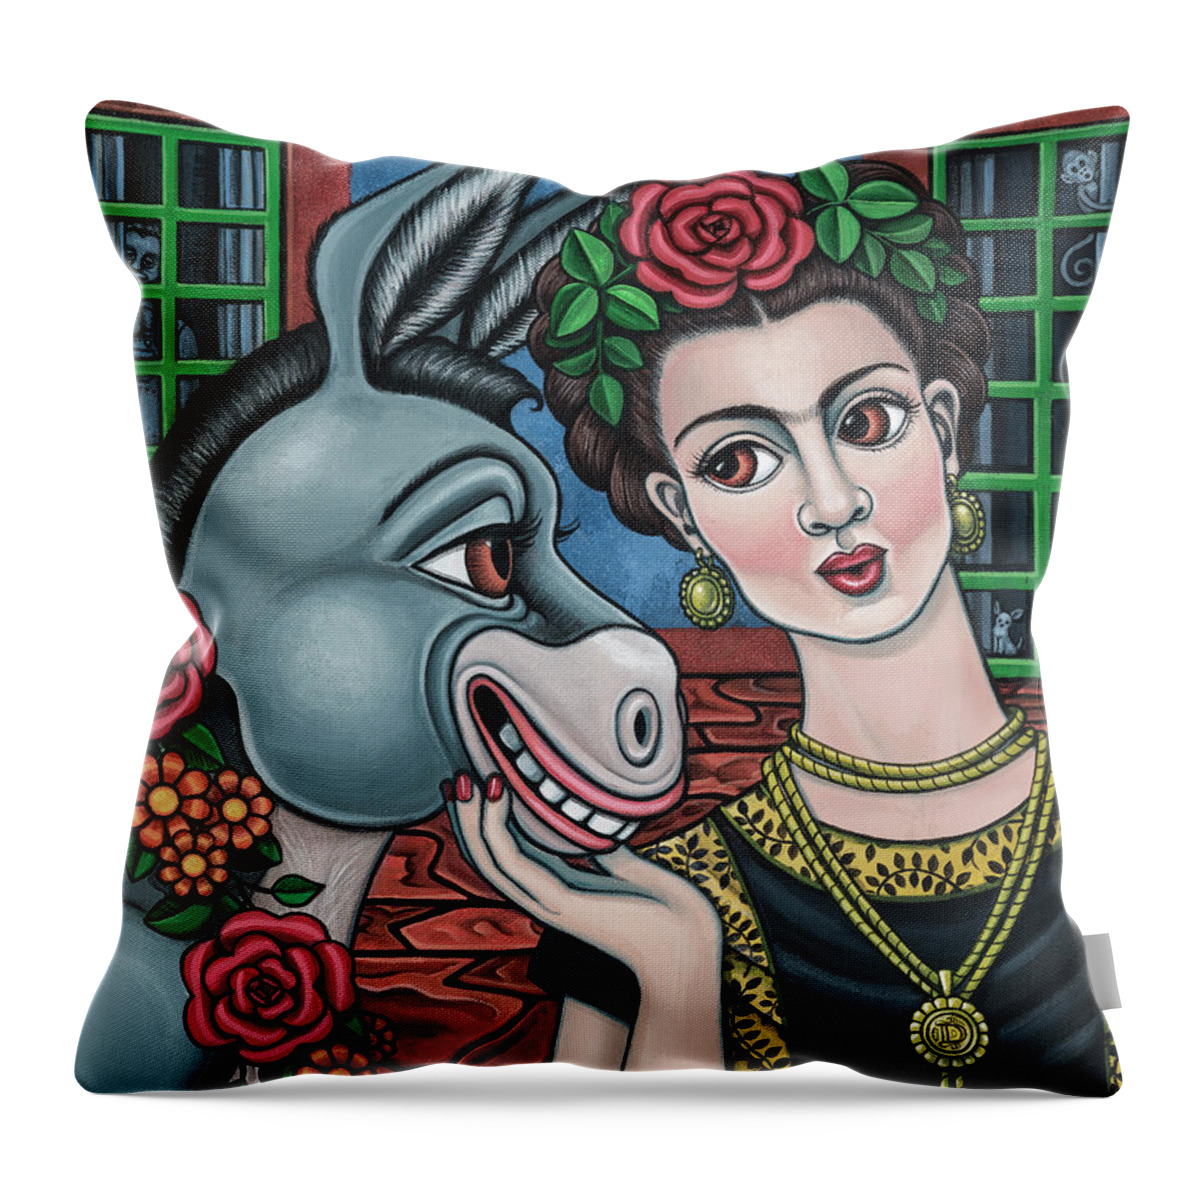 Hispanic Art Throw Pillow featuring the painting Beso or Fridas Kisses by Victoria De Almeida